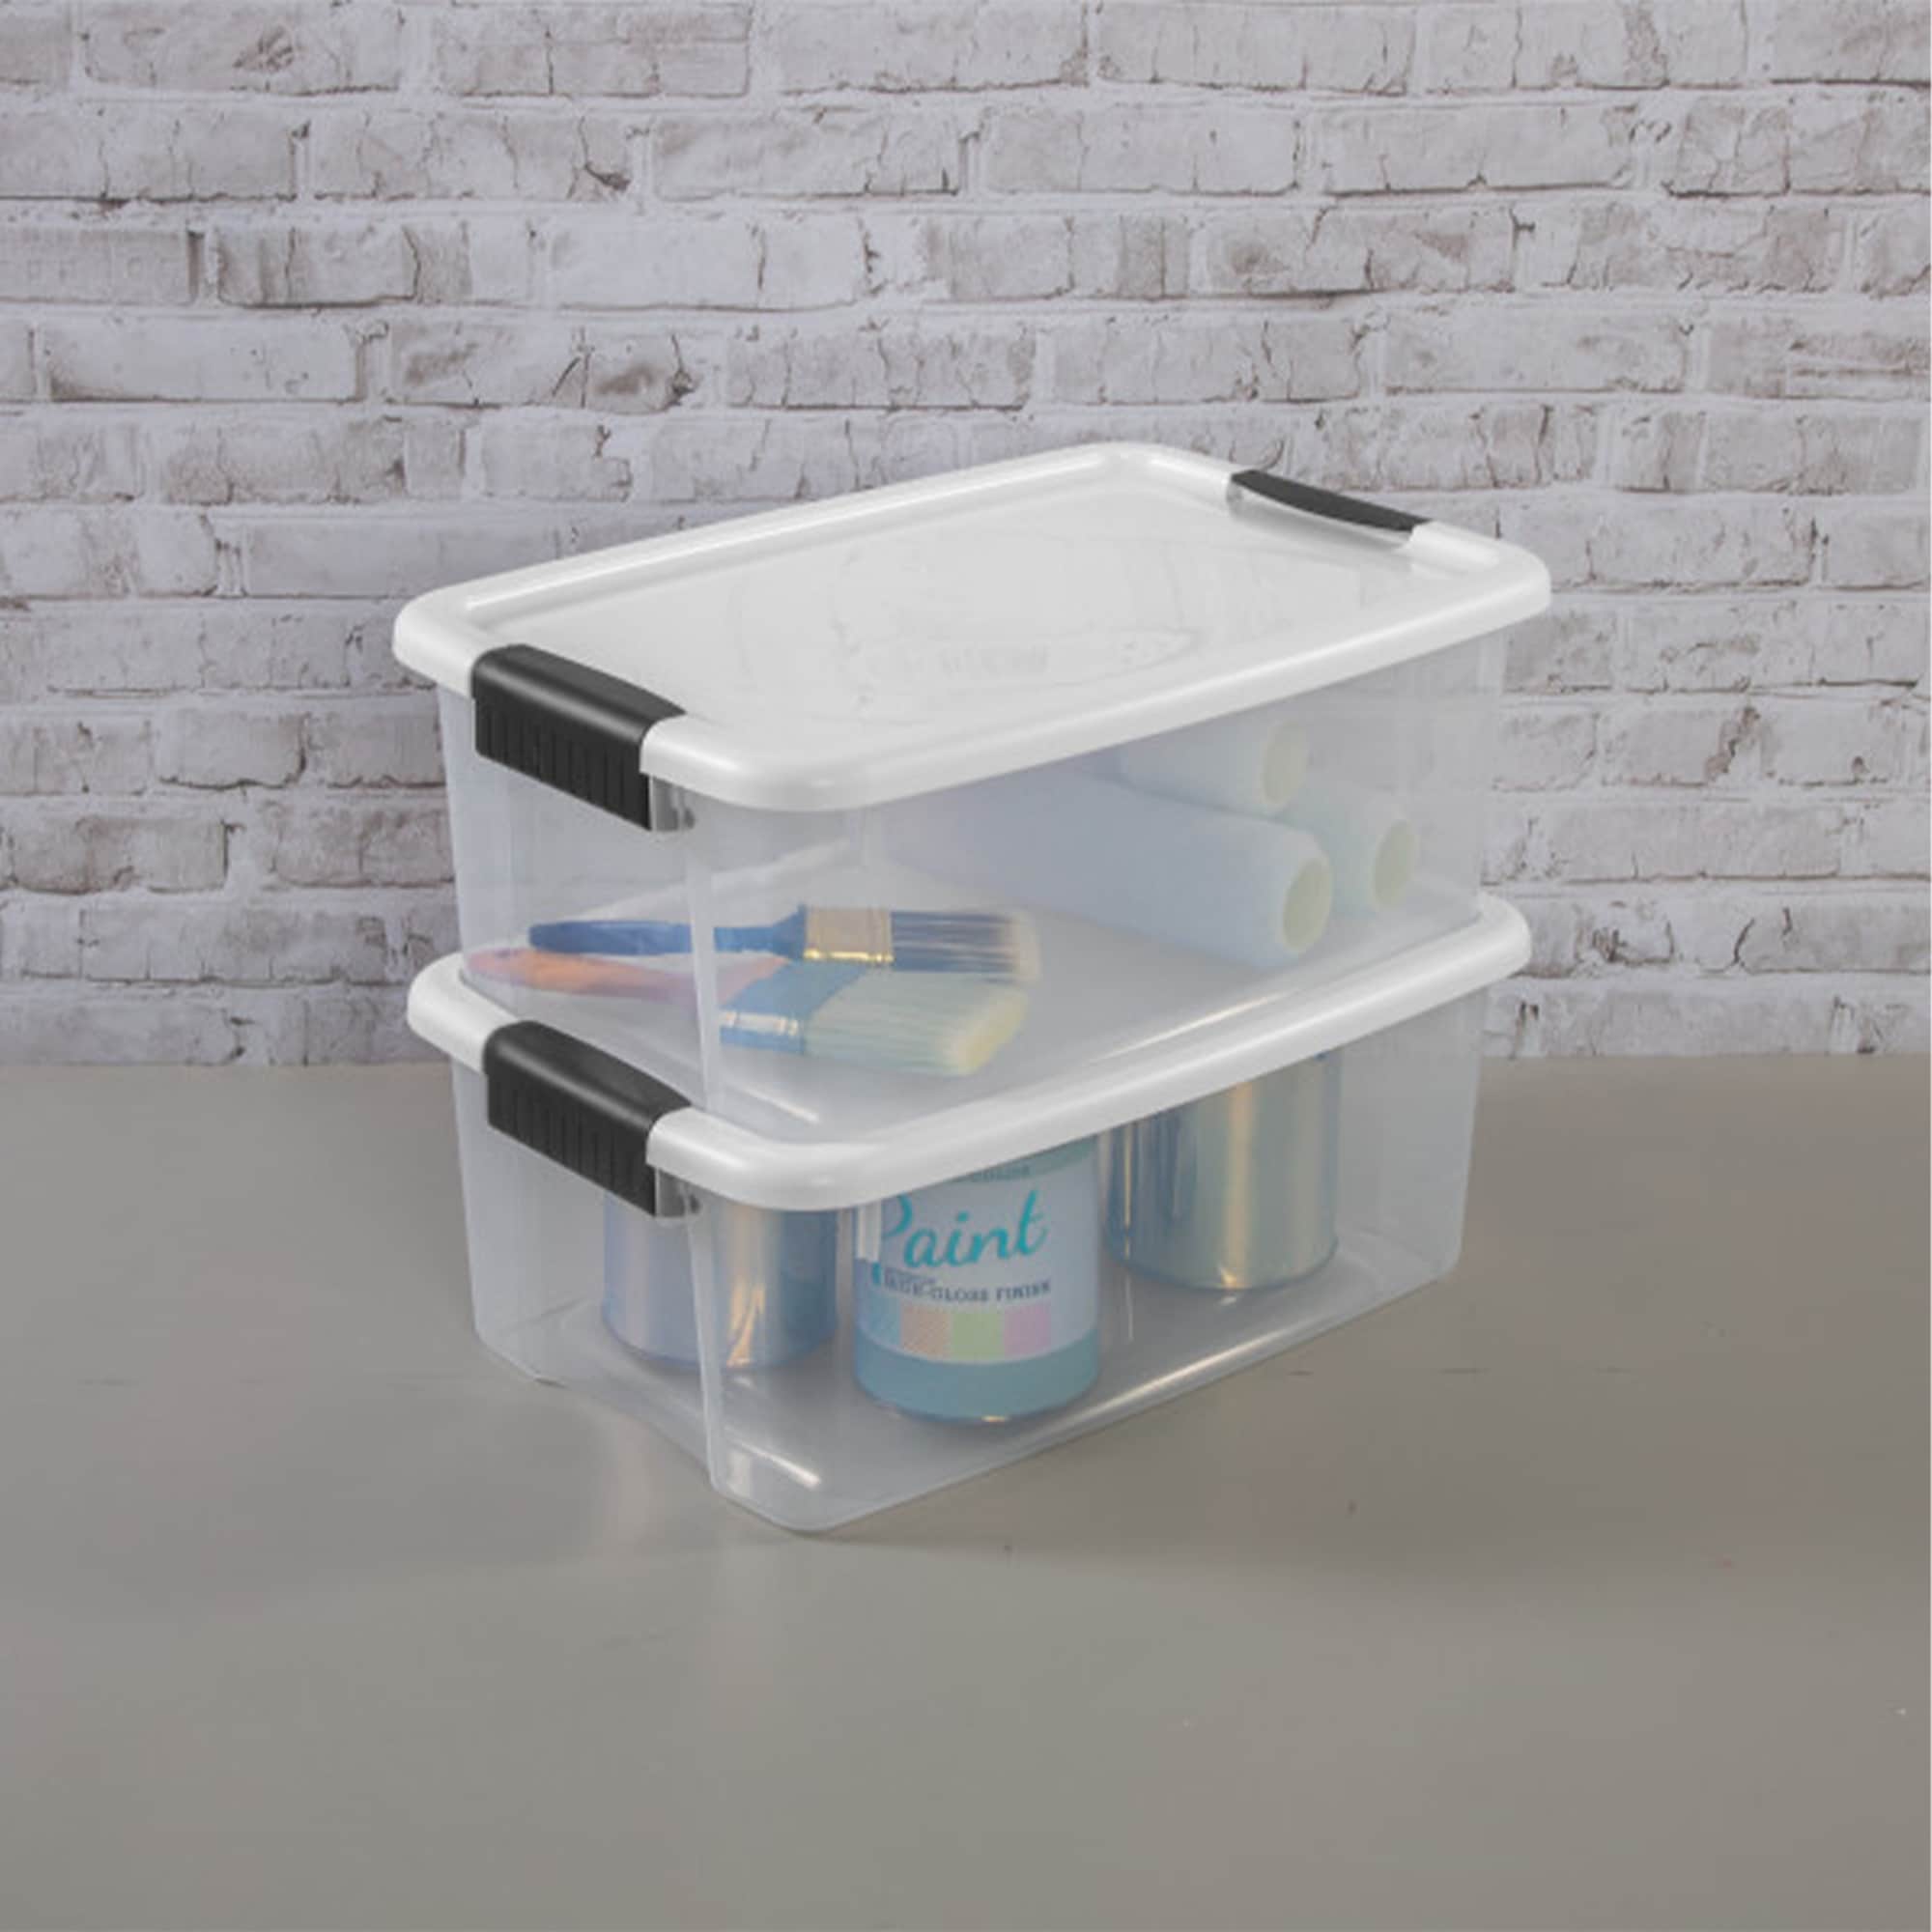 Rinboat 18 Quart Plastic Storage Bins with Lid, Clear Plastic Storage Tote,  4-Pack